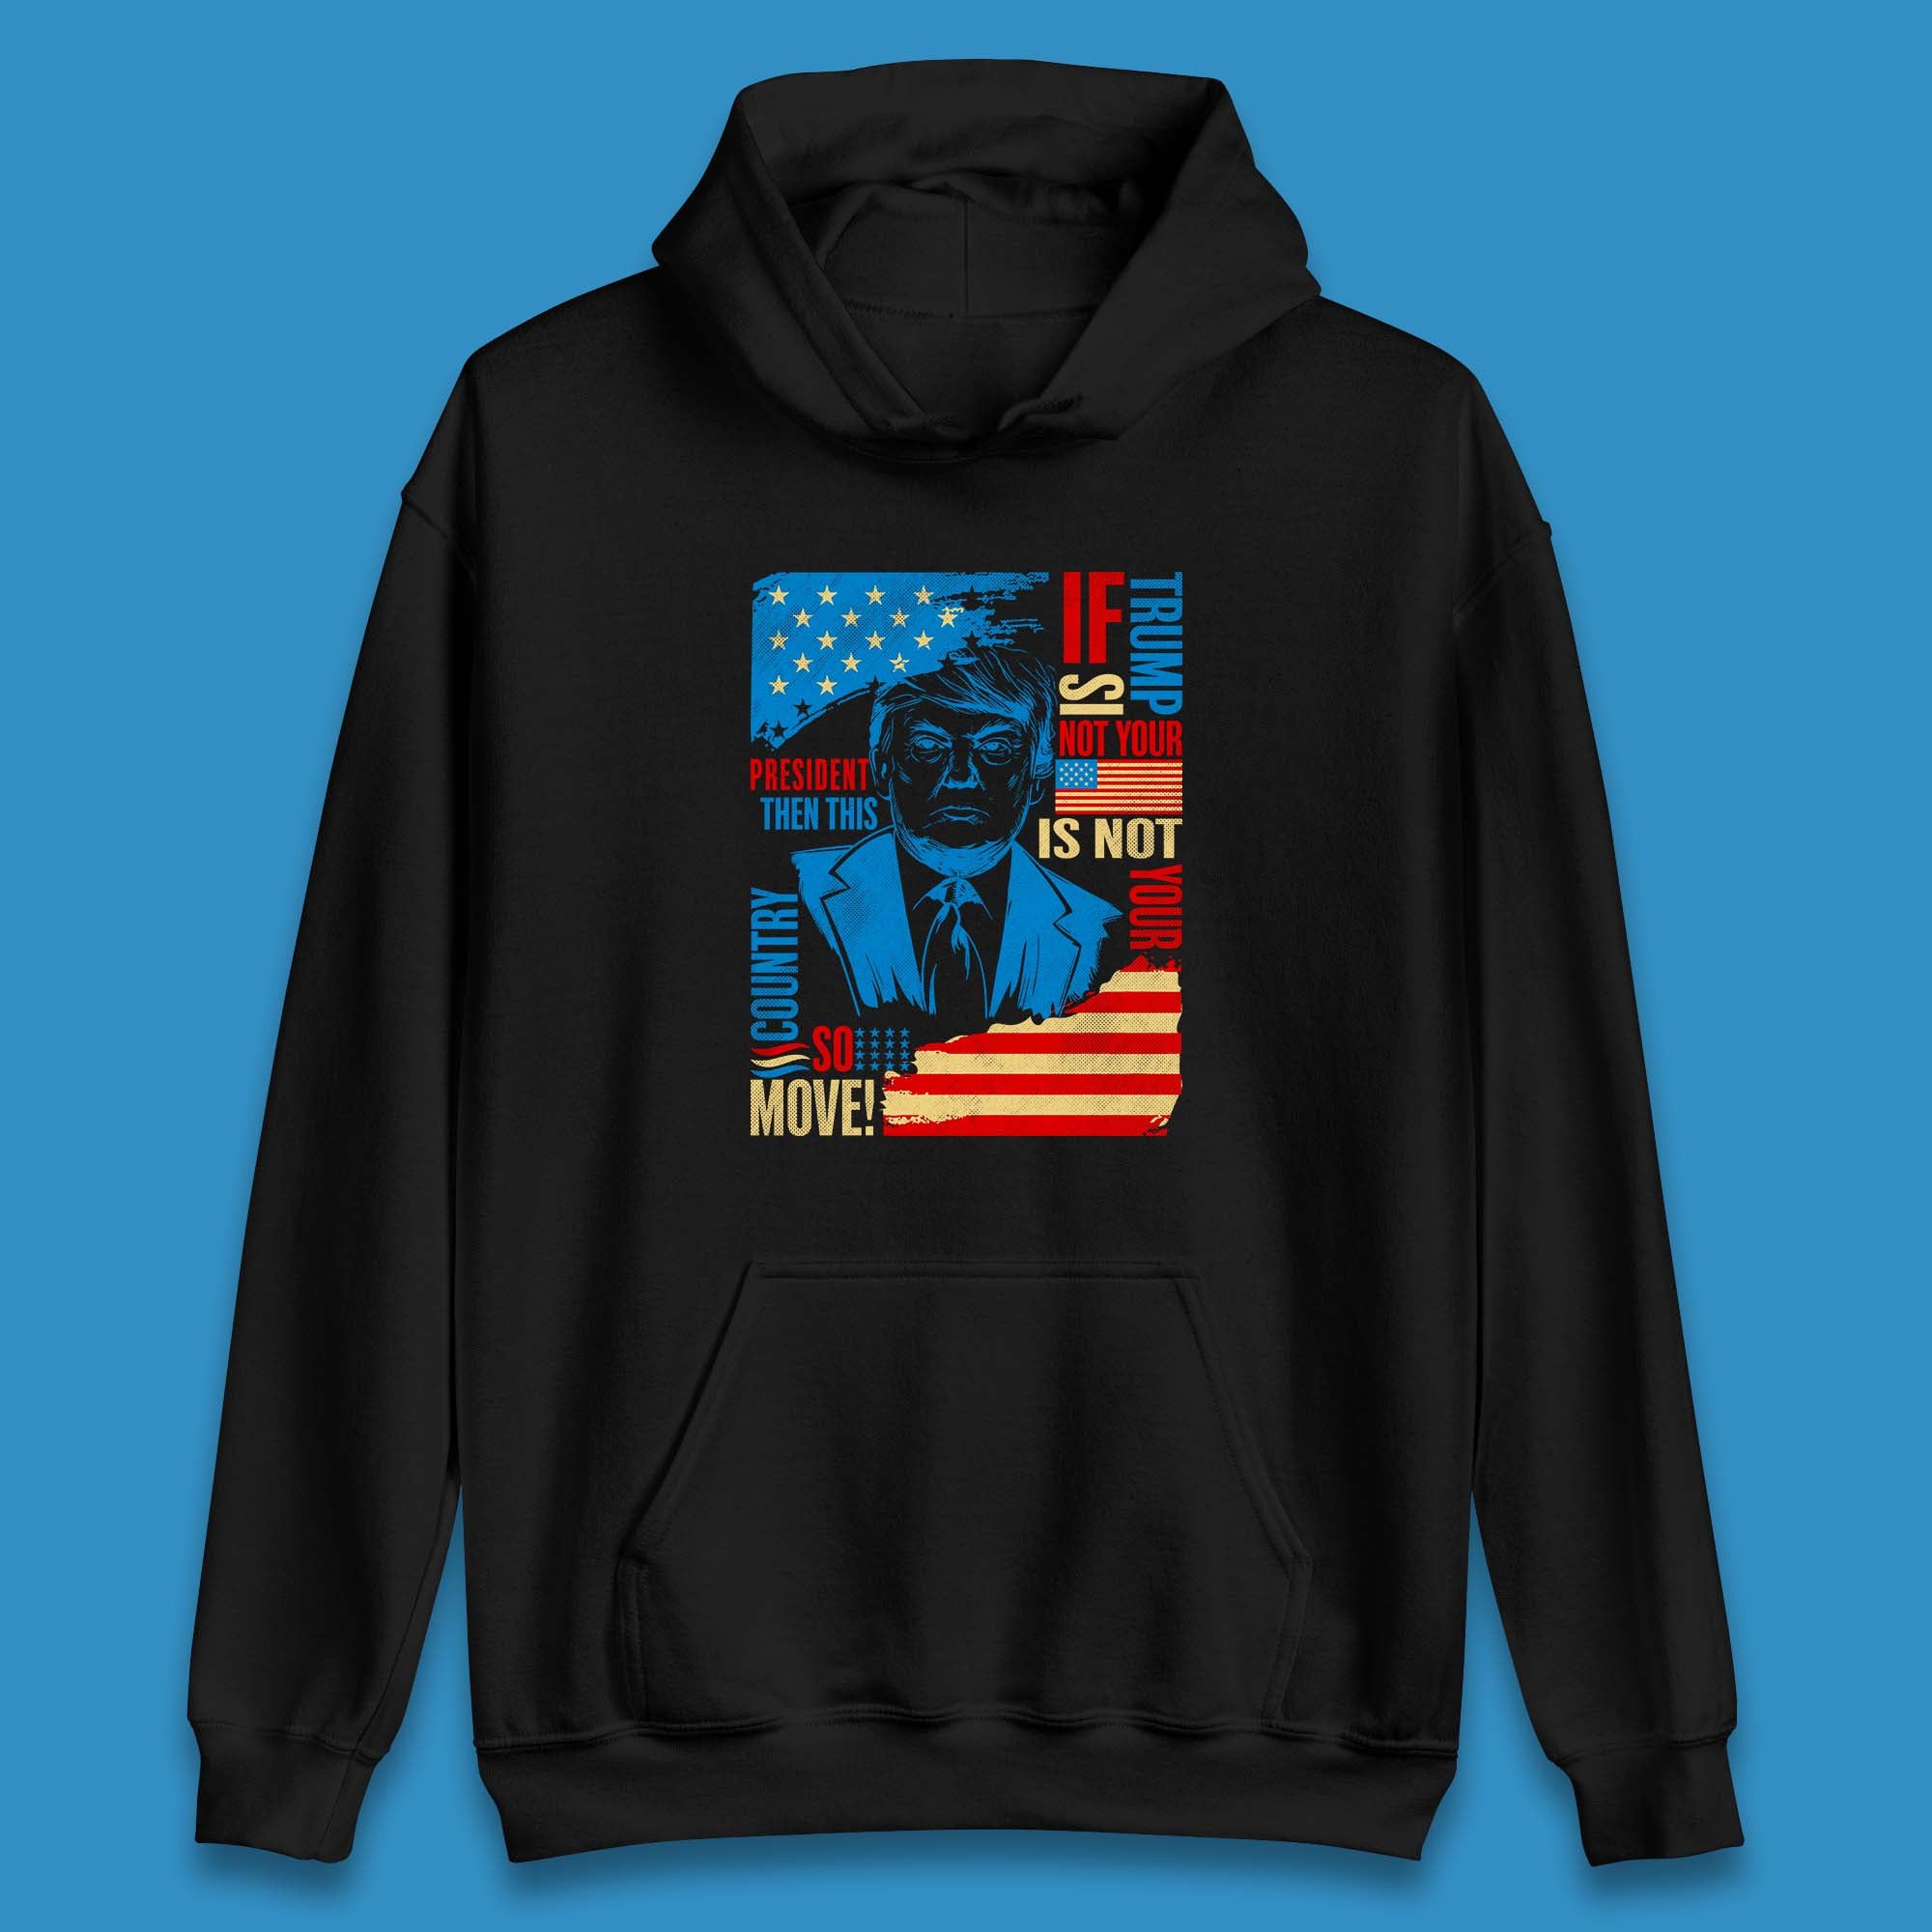 If Trump Is Not Your President Then This Is Not Your Country So Move President Election Republicans Campaign Unisex Hoodie